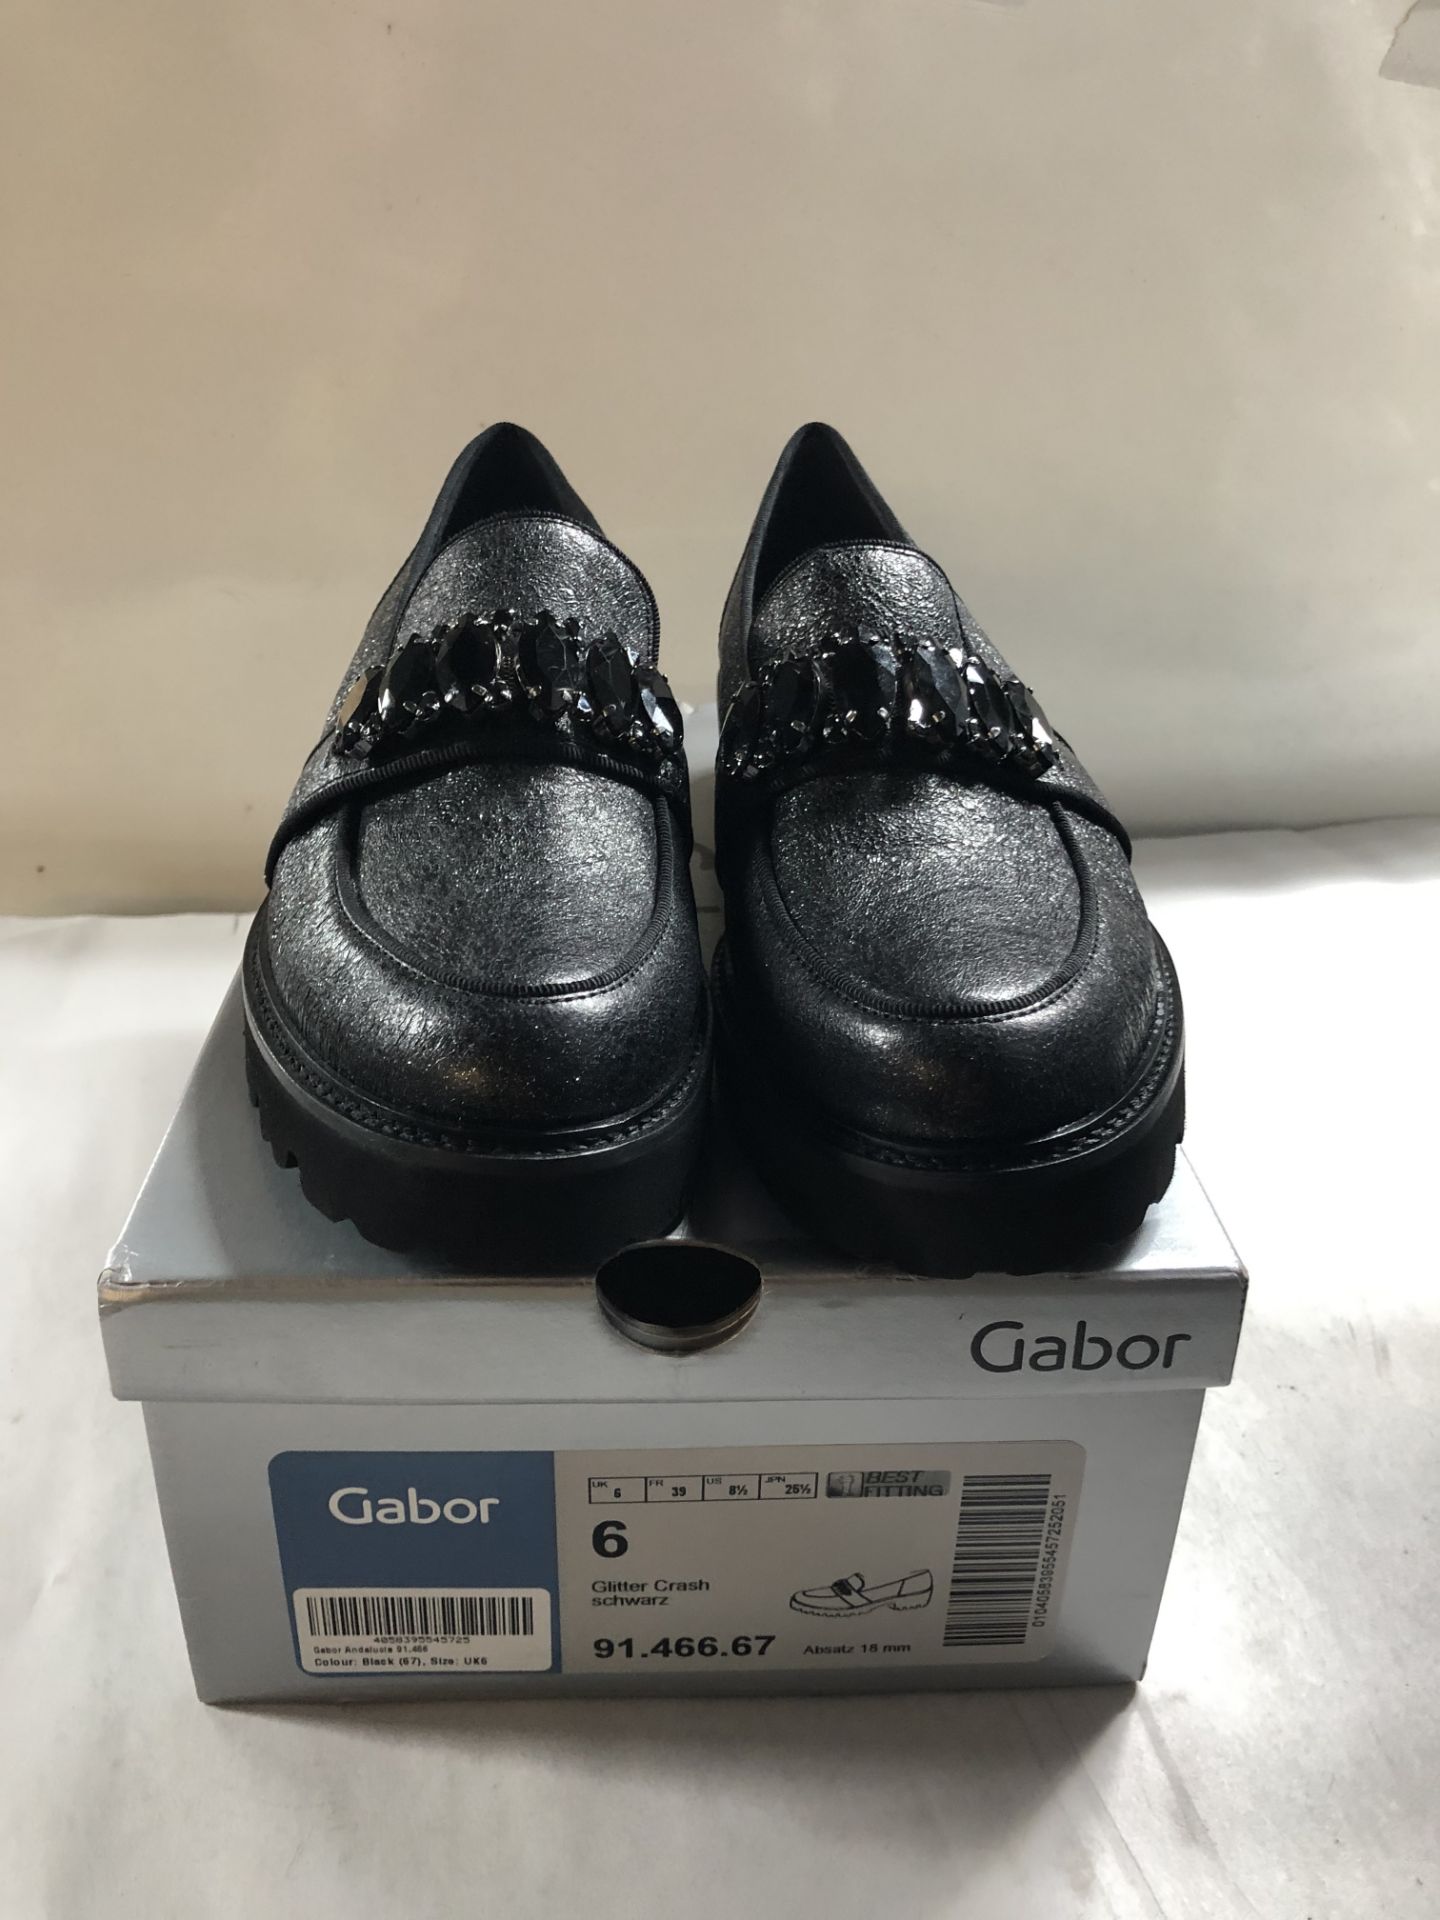 Gabor Loafers. UK 6